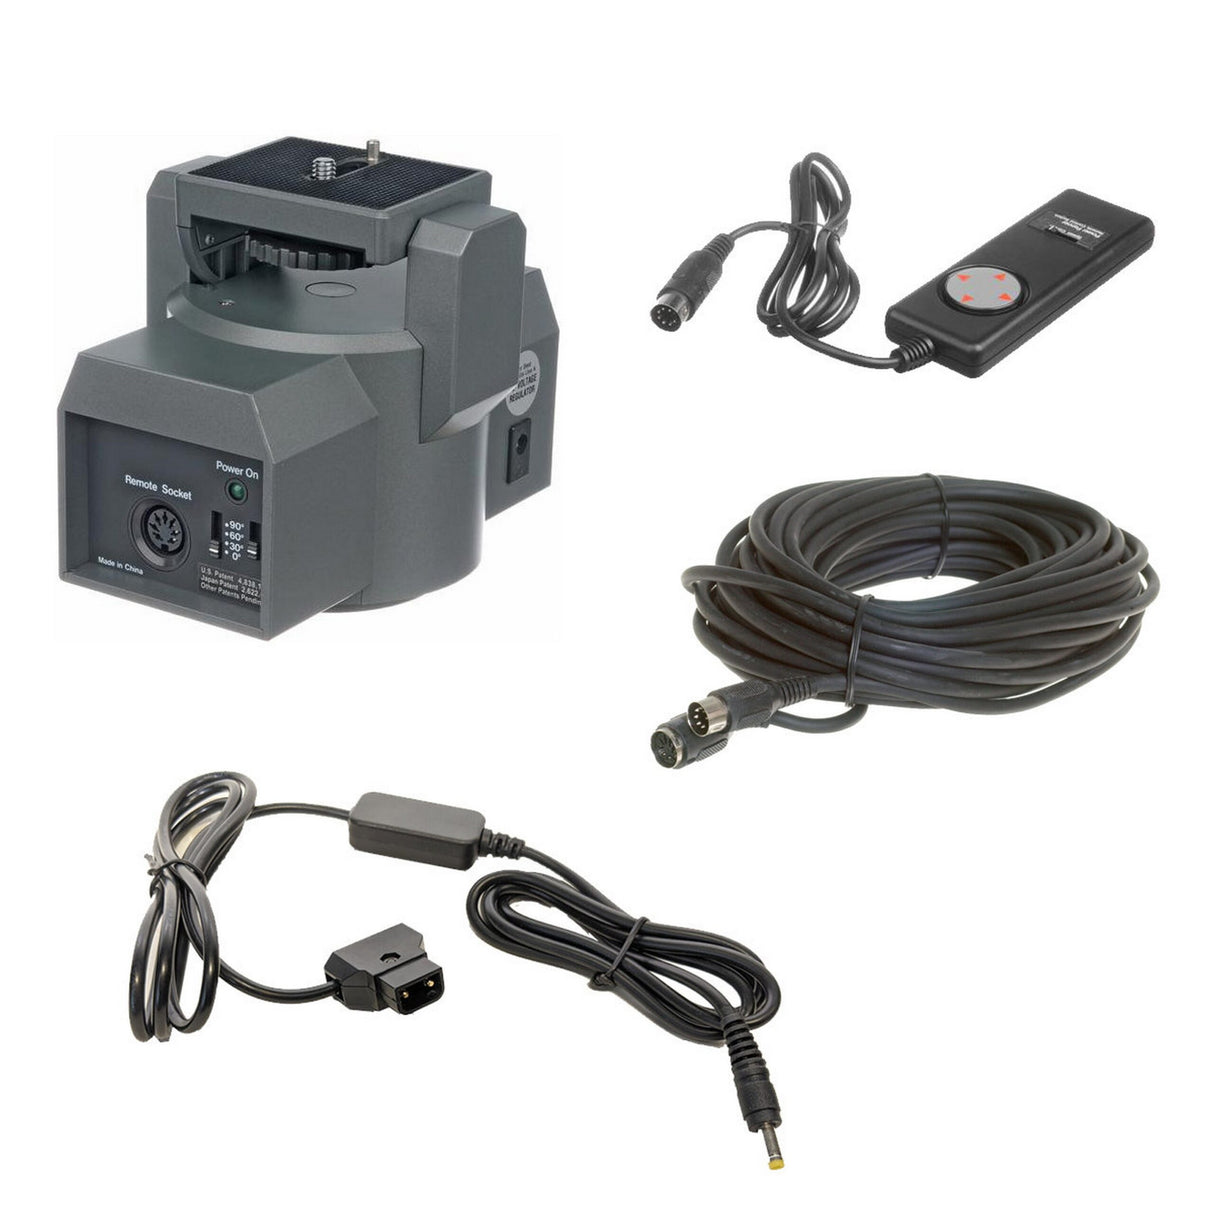 Bescor MP1DK50 MP101, DTAP Power Adapter Cord Kit and 50 Foot Remote Extension Cord